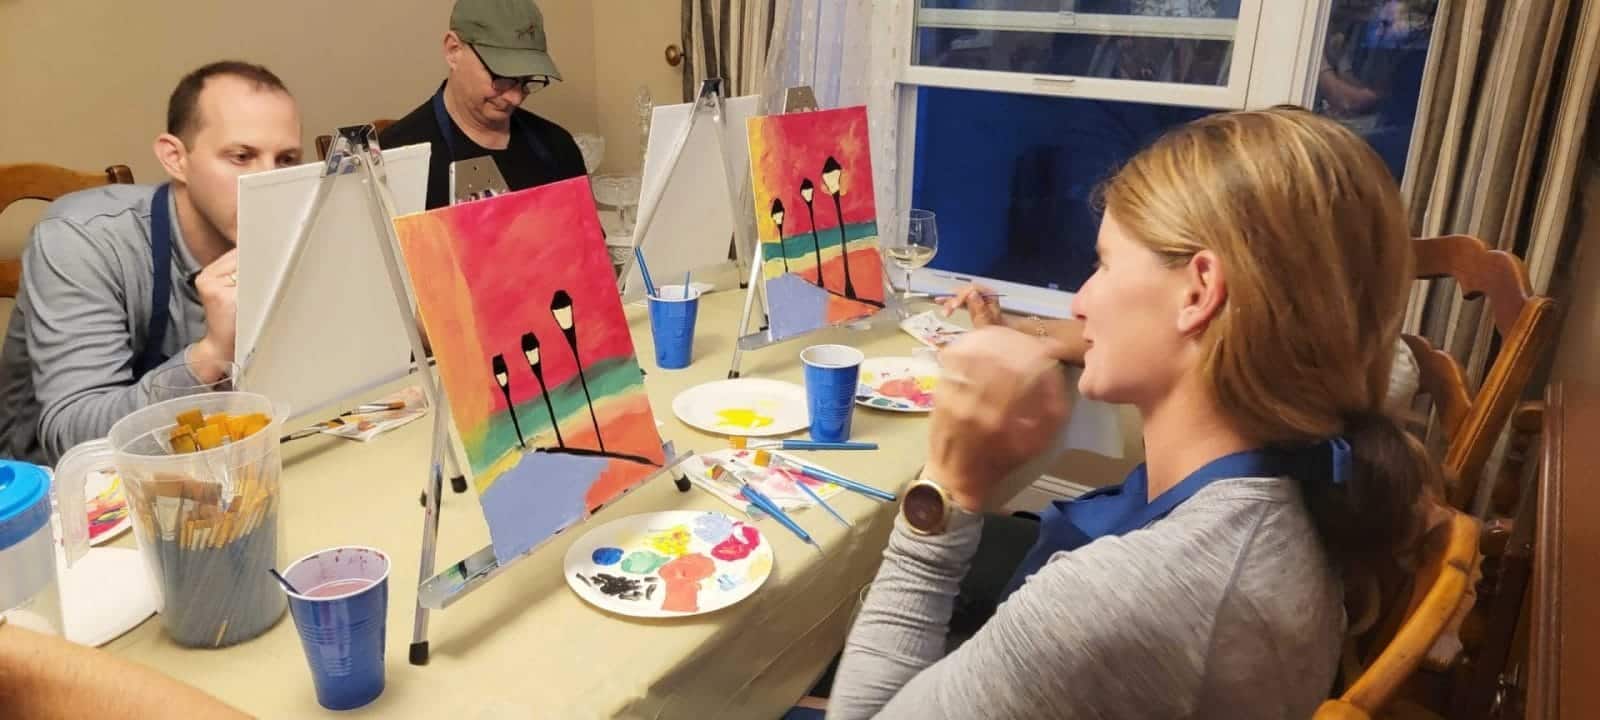 A paint and sip group enjoying a creative session at a table.